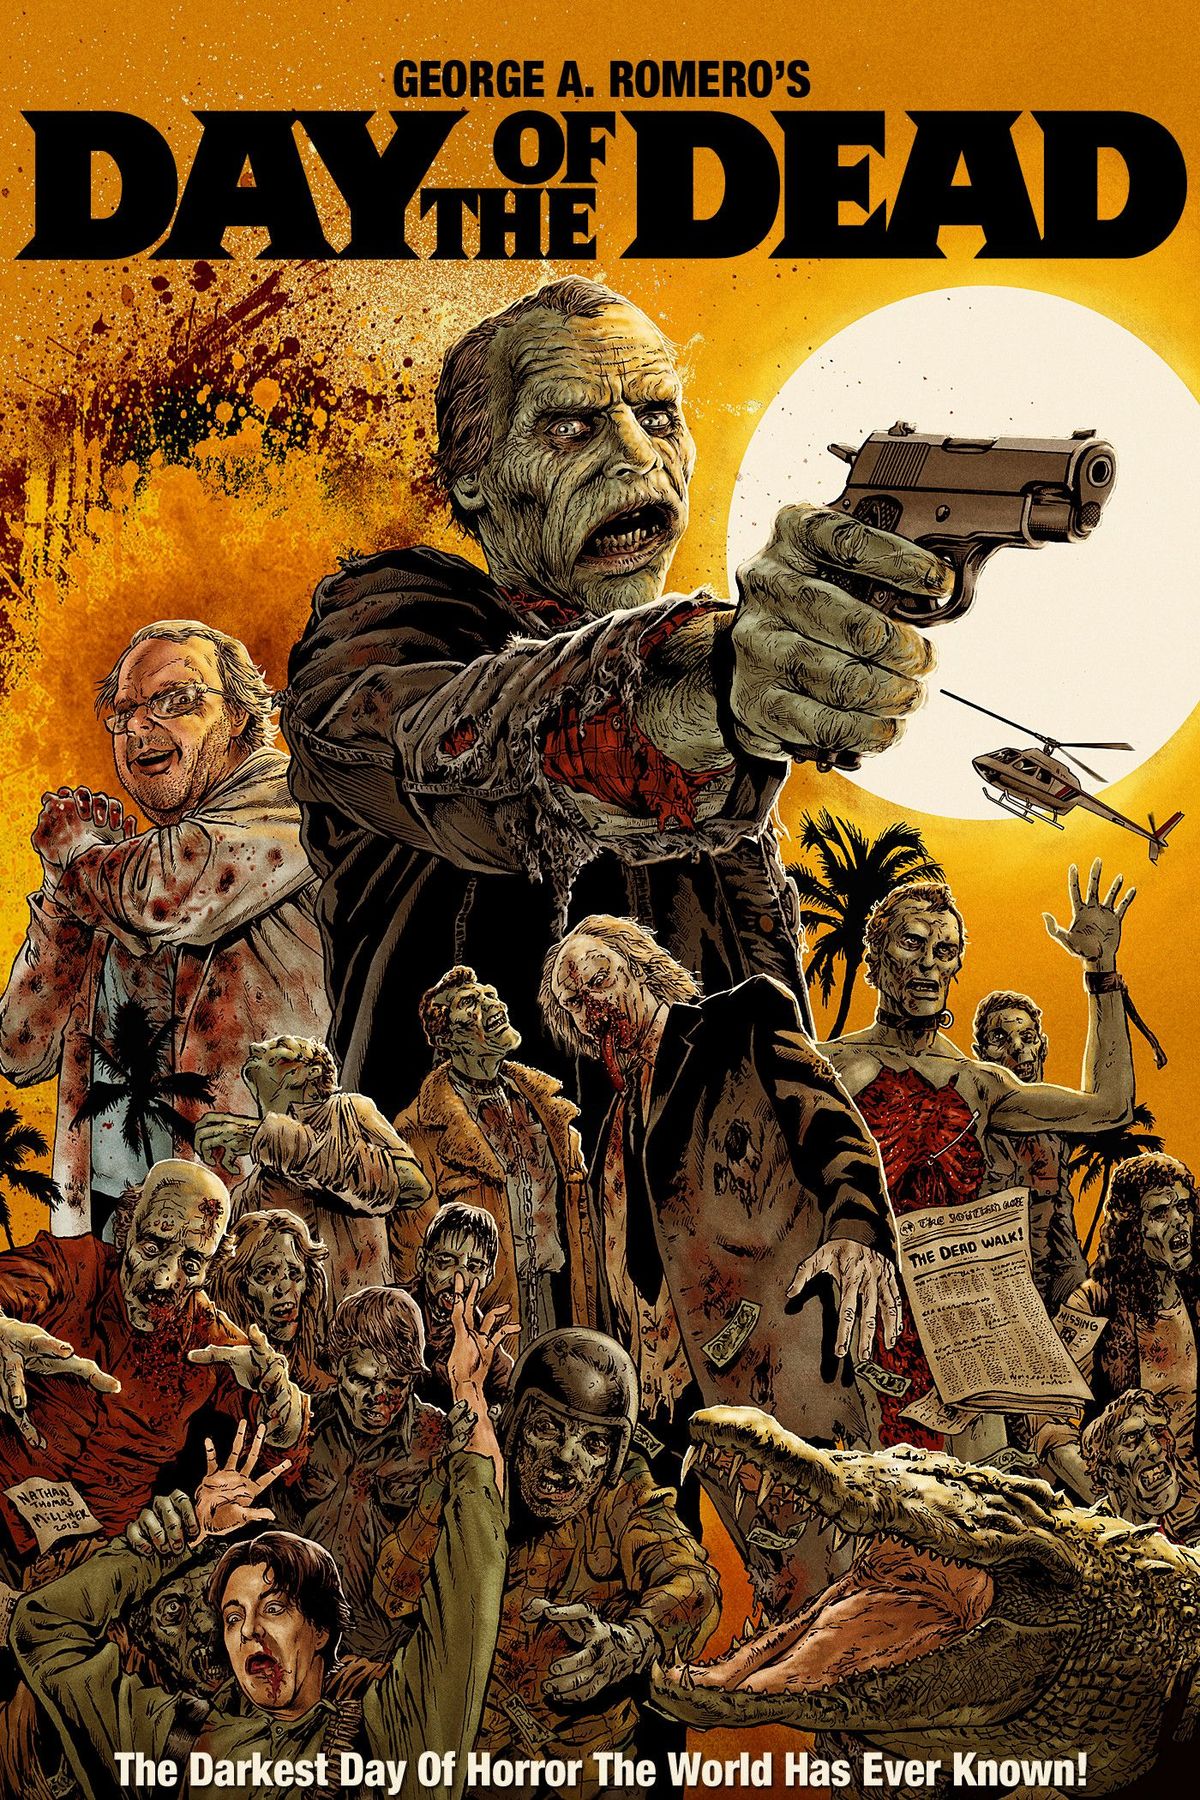 Mark Tonderai til Helm 'Day of the Dead' Remake